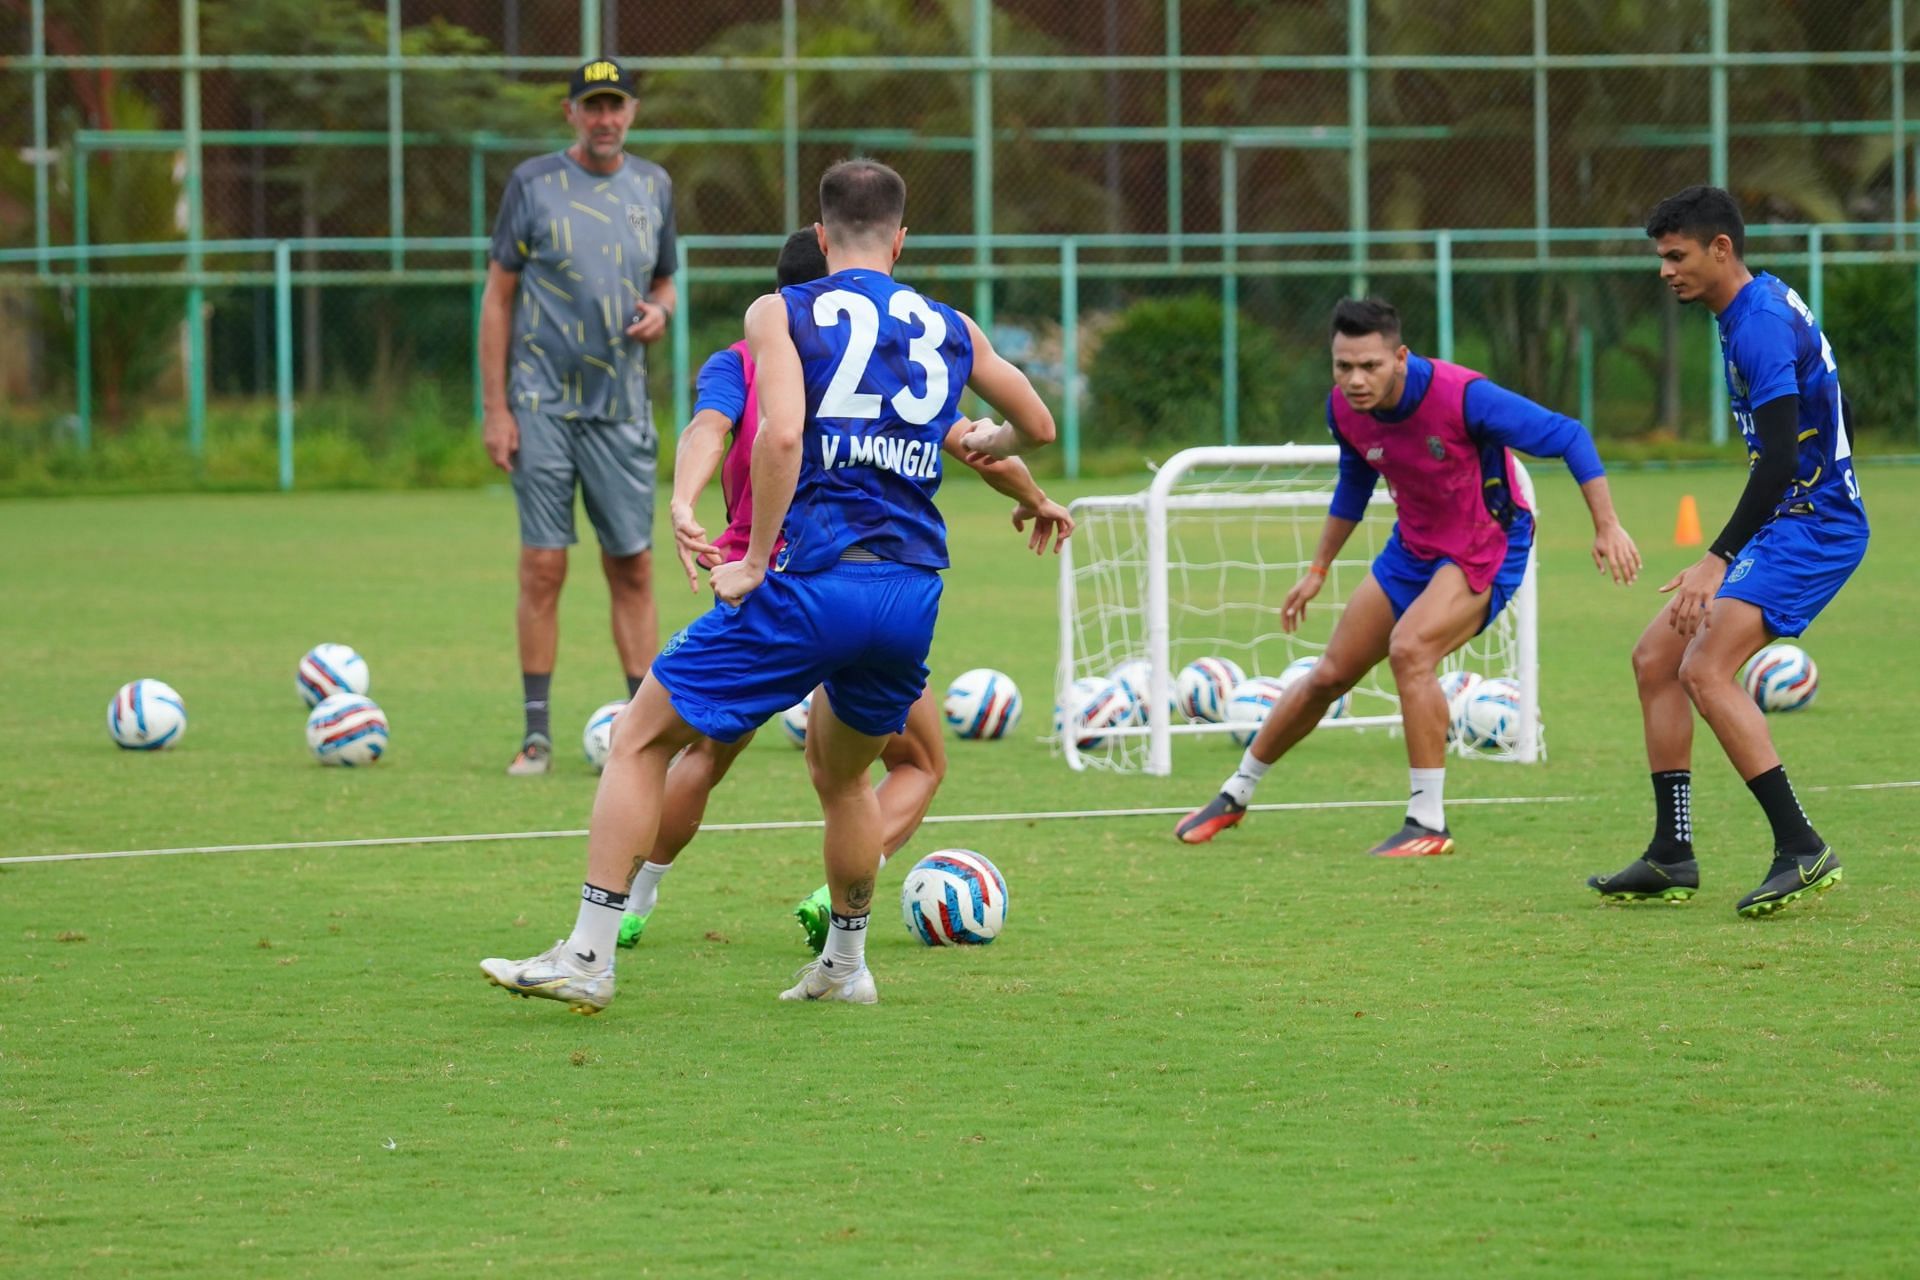 Kerala Blasters FC players during a training session ahead oftheir season opener against East Bengal FC. (Image Courtesy: ISL)